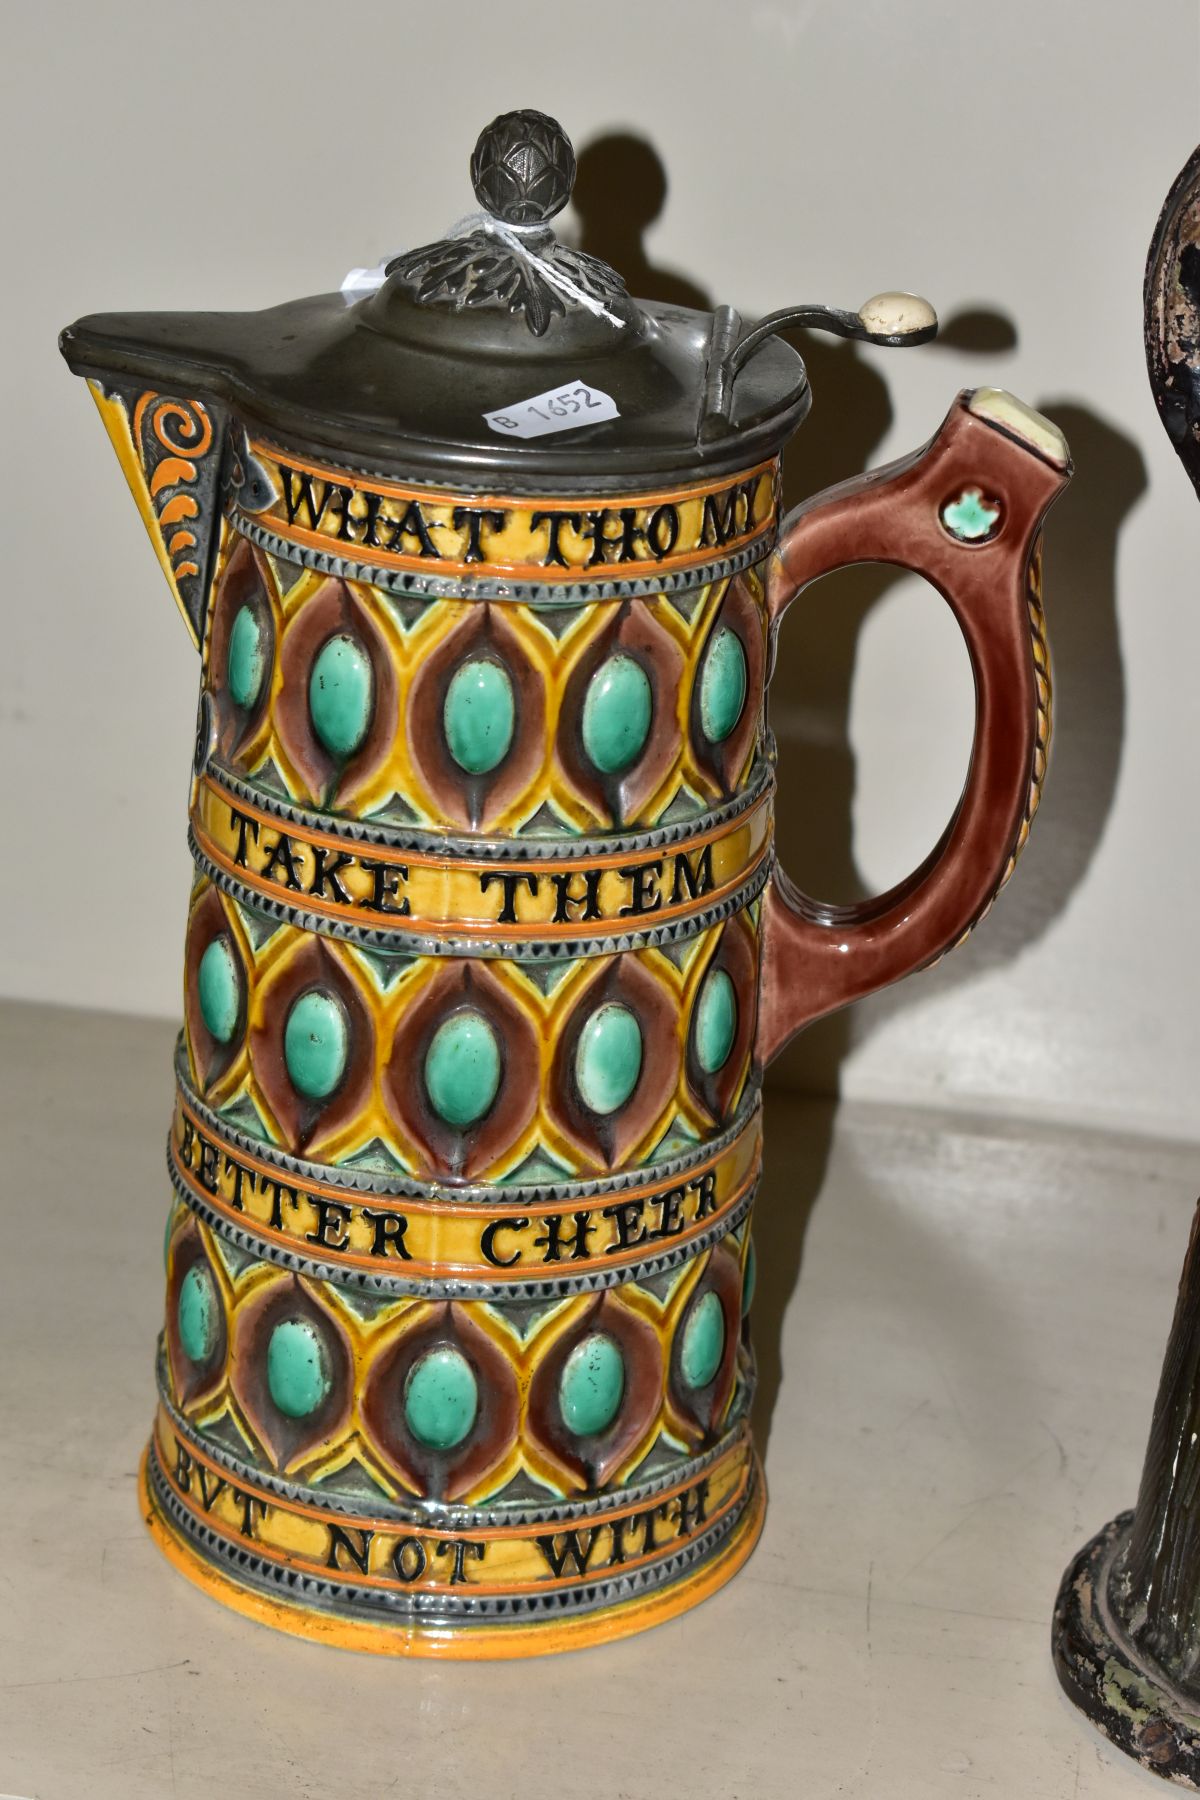 A WEDGWOOD MAJOLICA BEER JUG, having pewter cover 'WHAT THOU MY GATES BE POOR TAKE THEM IN GOOD PART - Image 9 of 12